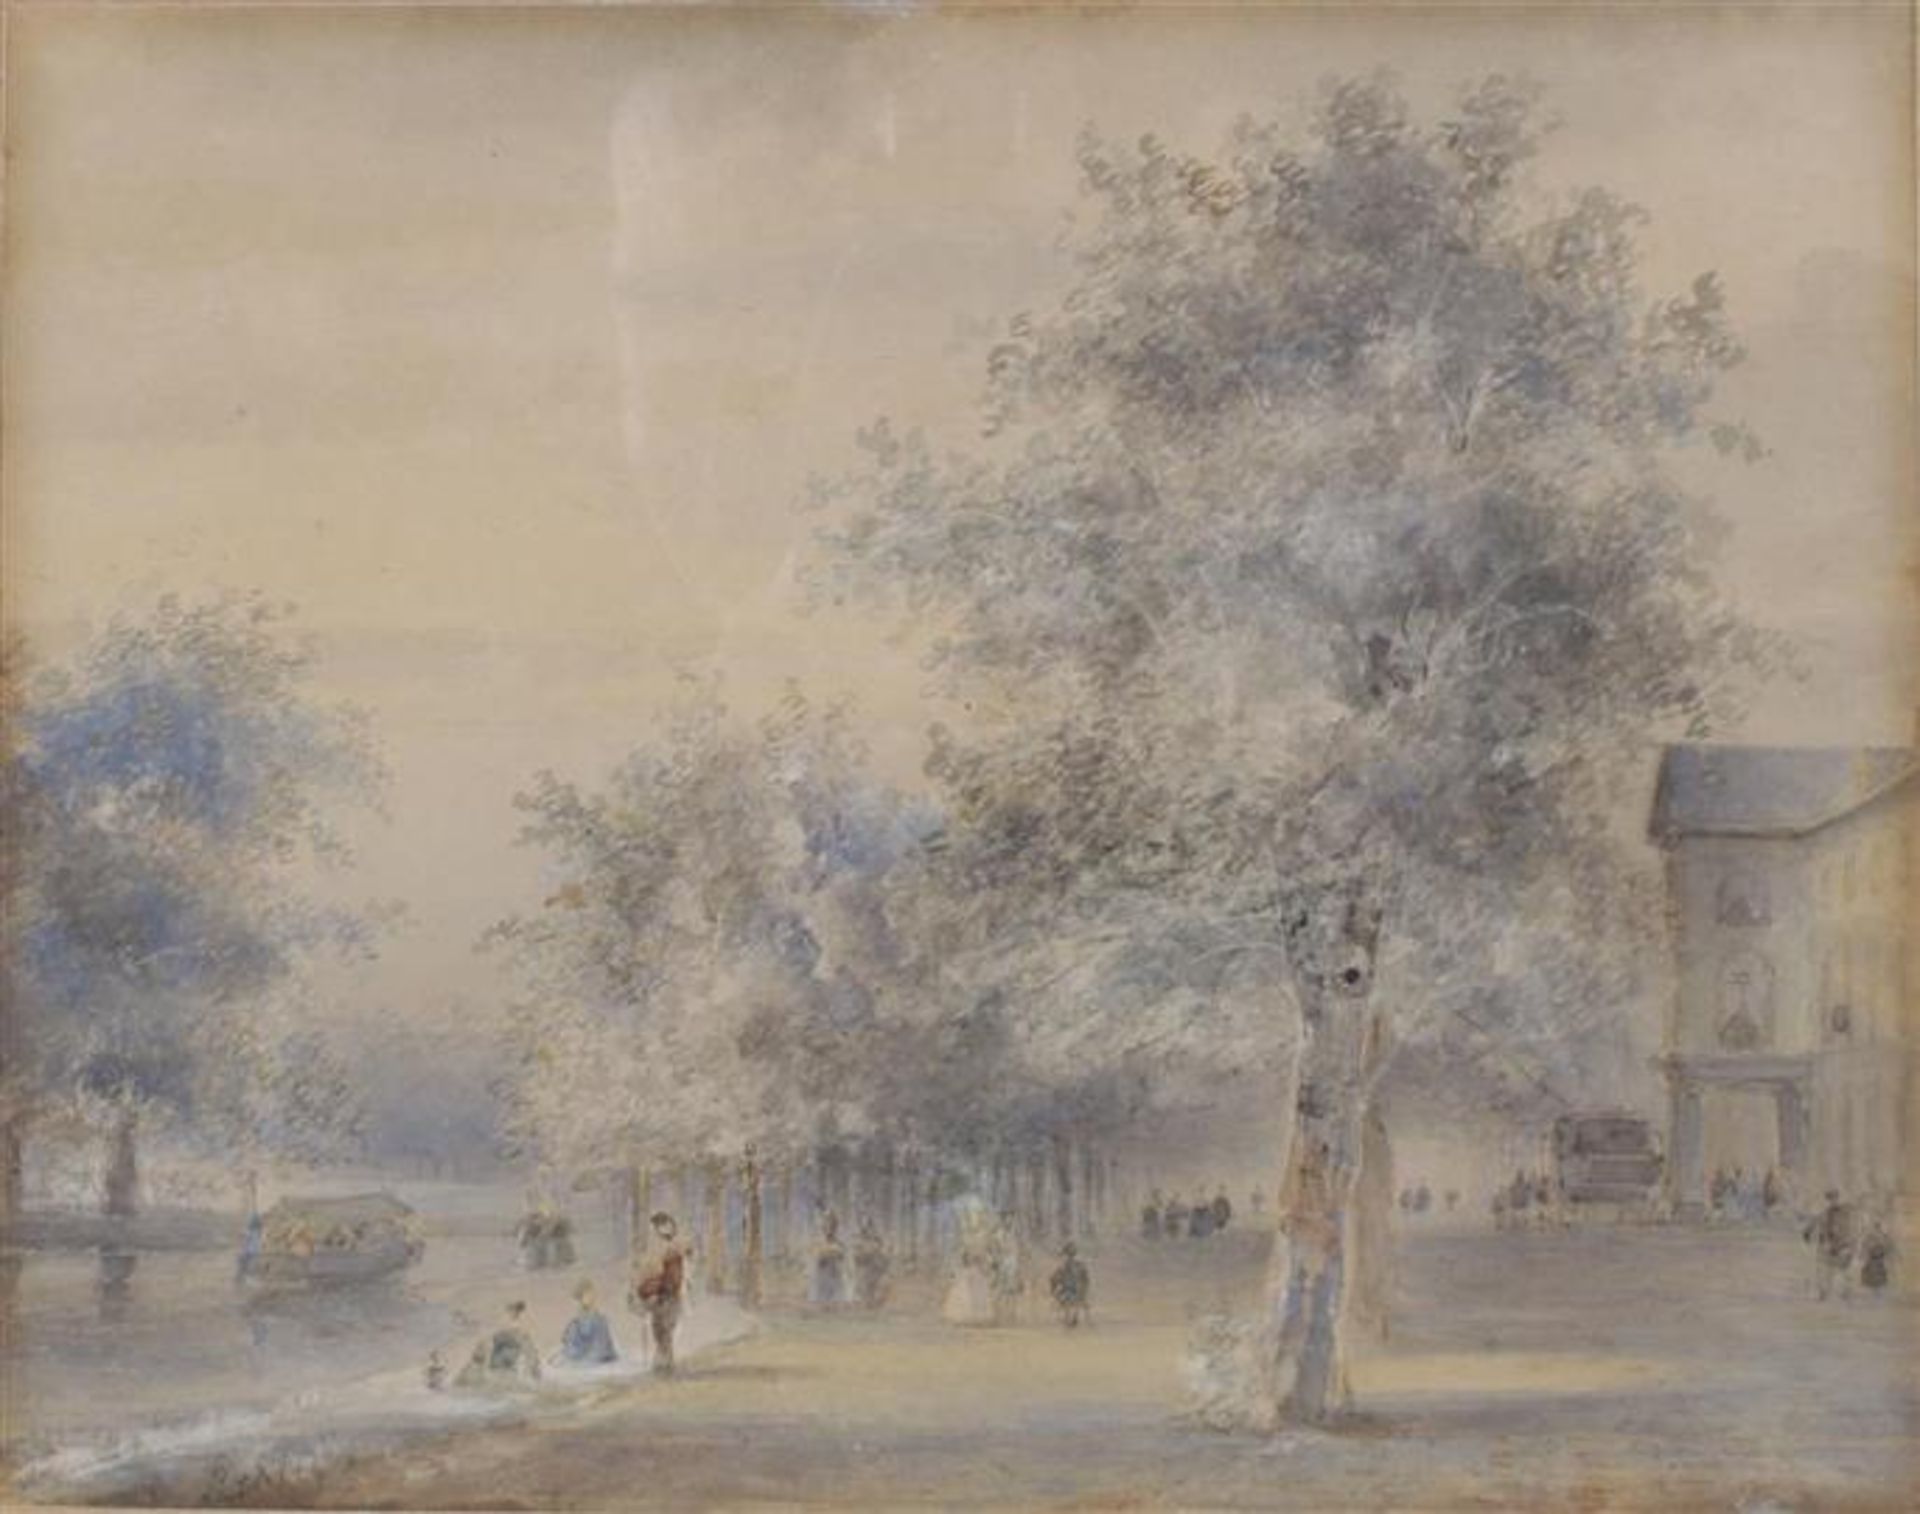 Bottom left remains of signature, cityscape with figures on a river under a tree, watercolor 16x20 - Image 2 of 3